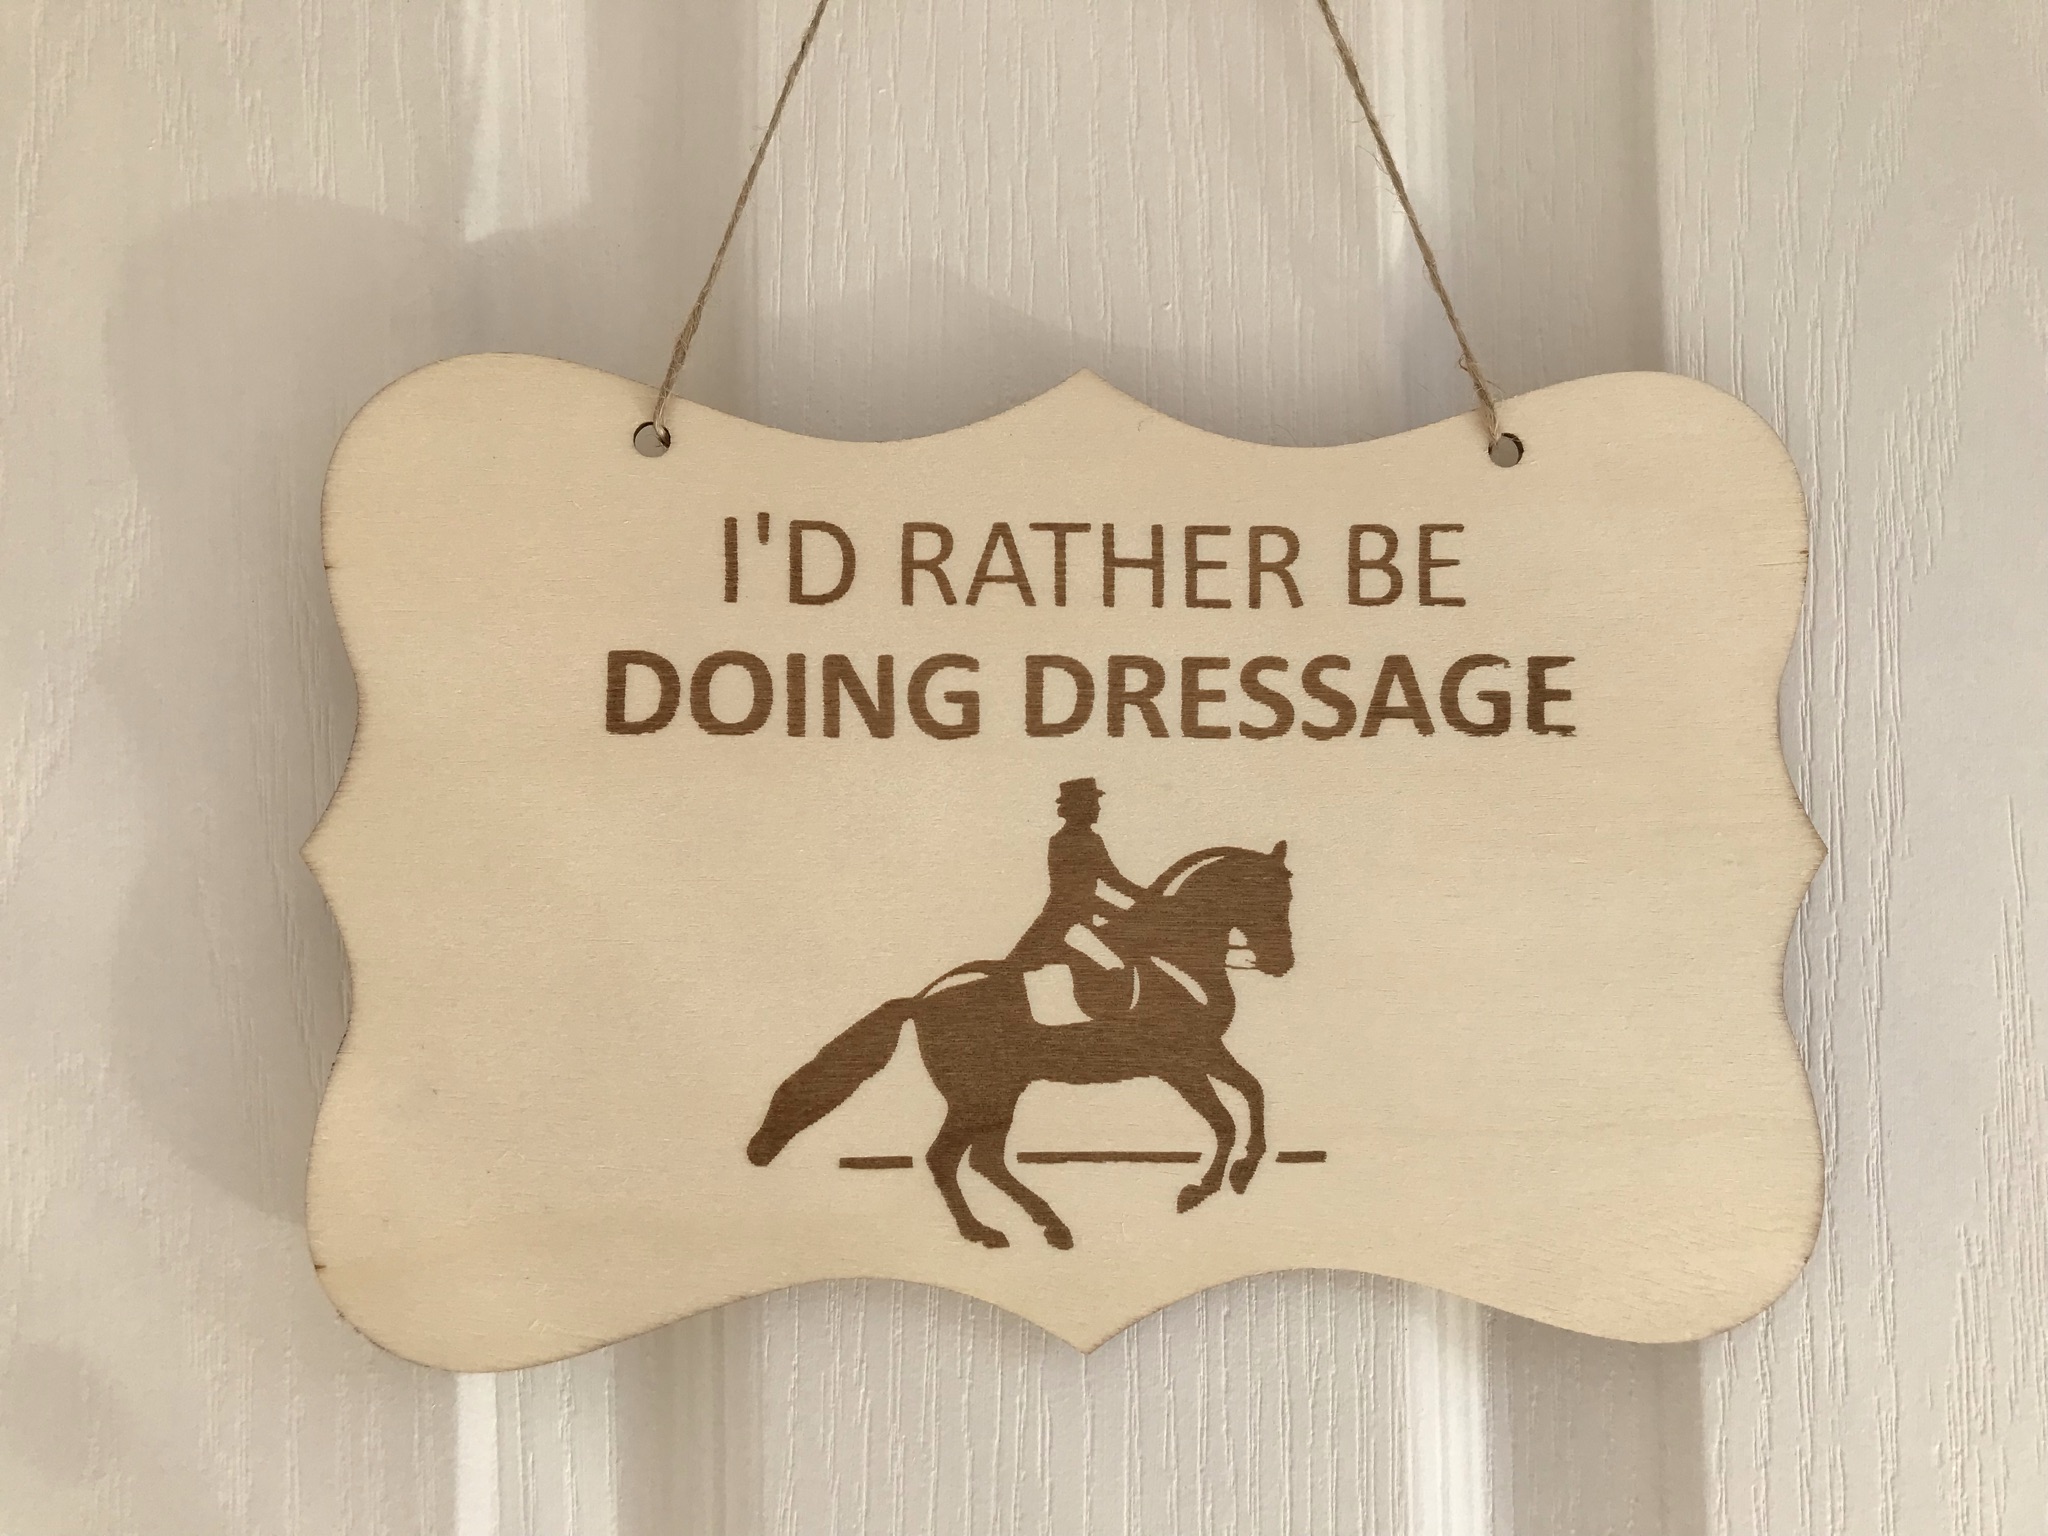 Rather be dressage F